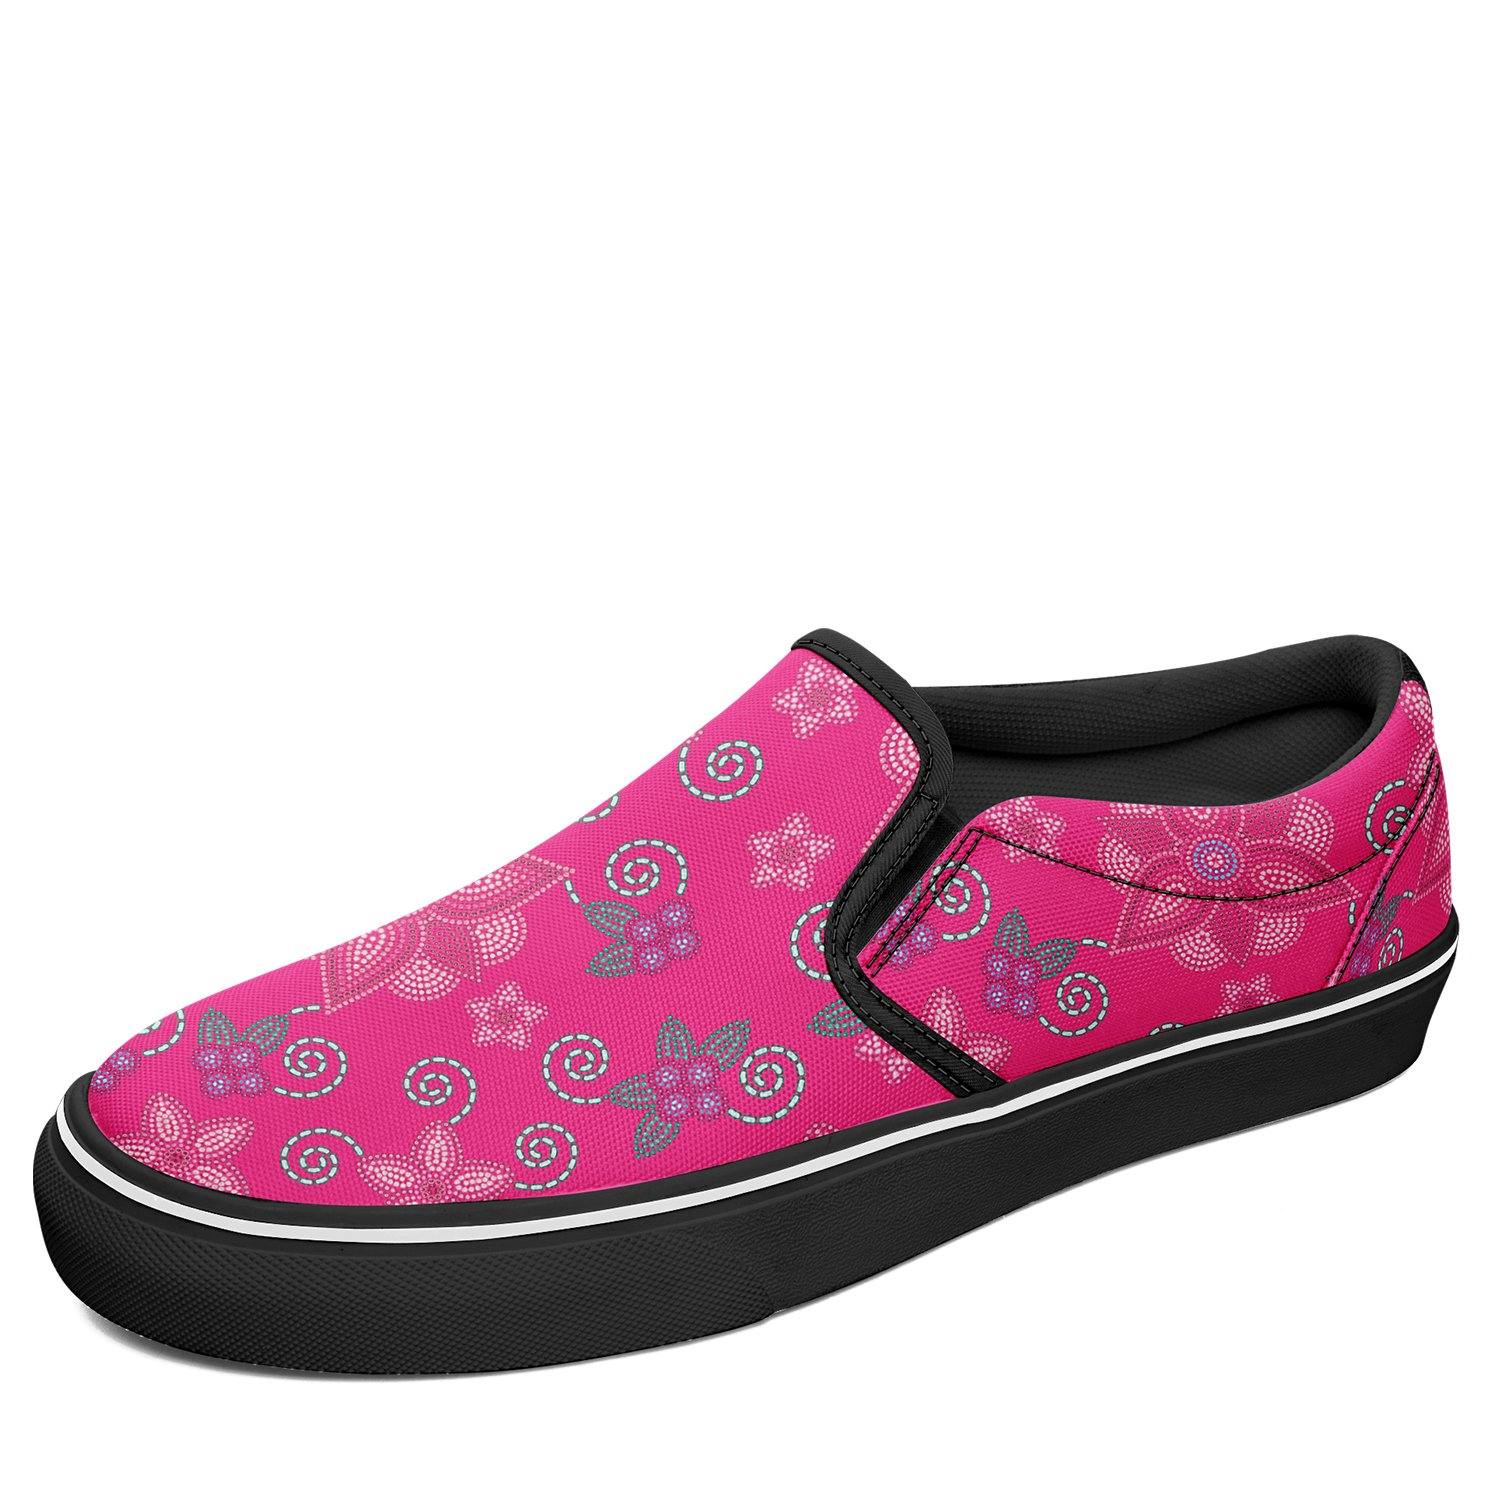 Kids Otoyimm Shoes Slip On Canvas